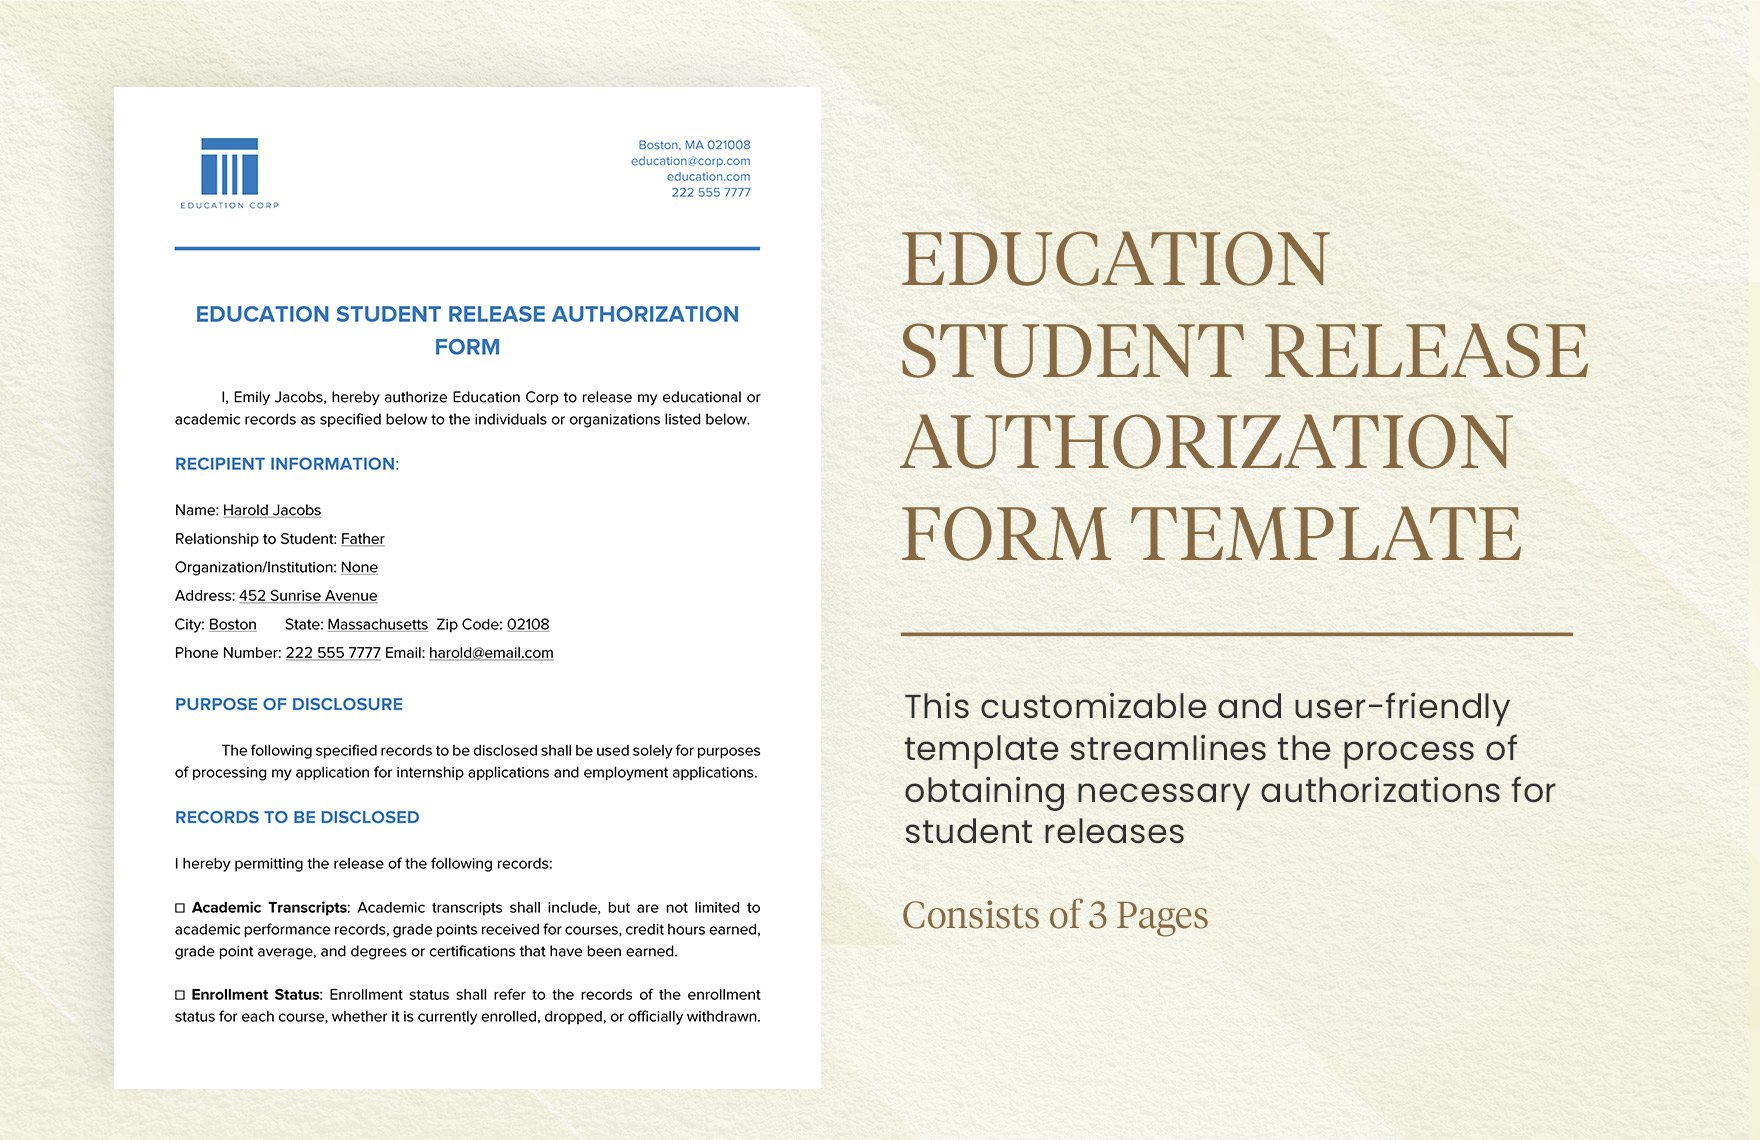 Education Student Release Authorization Form Template in Word, Google Docs, PDF